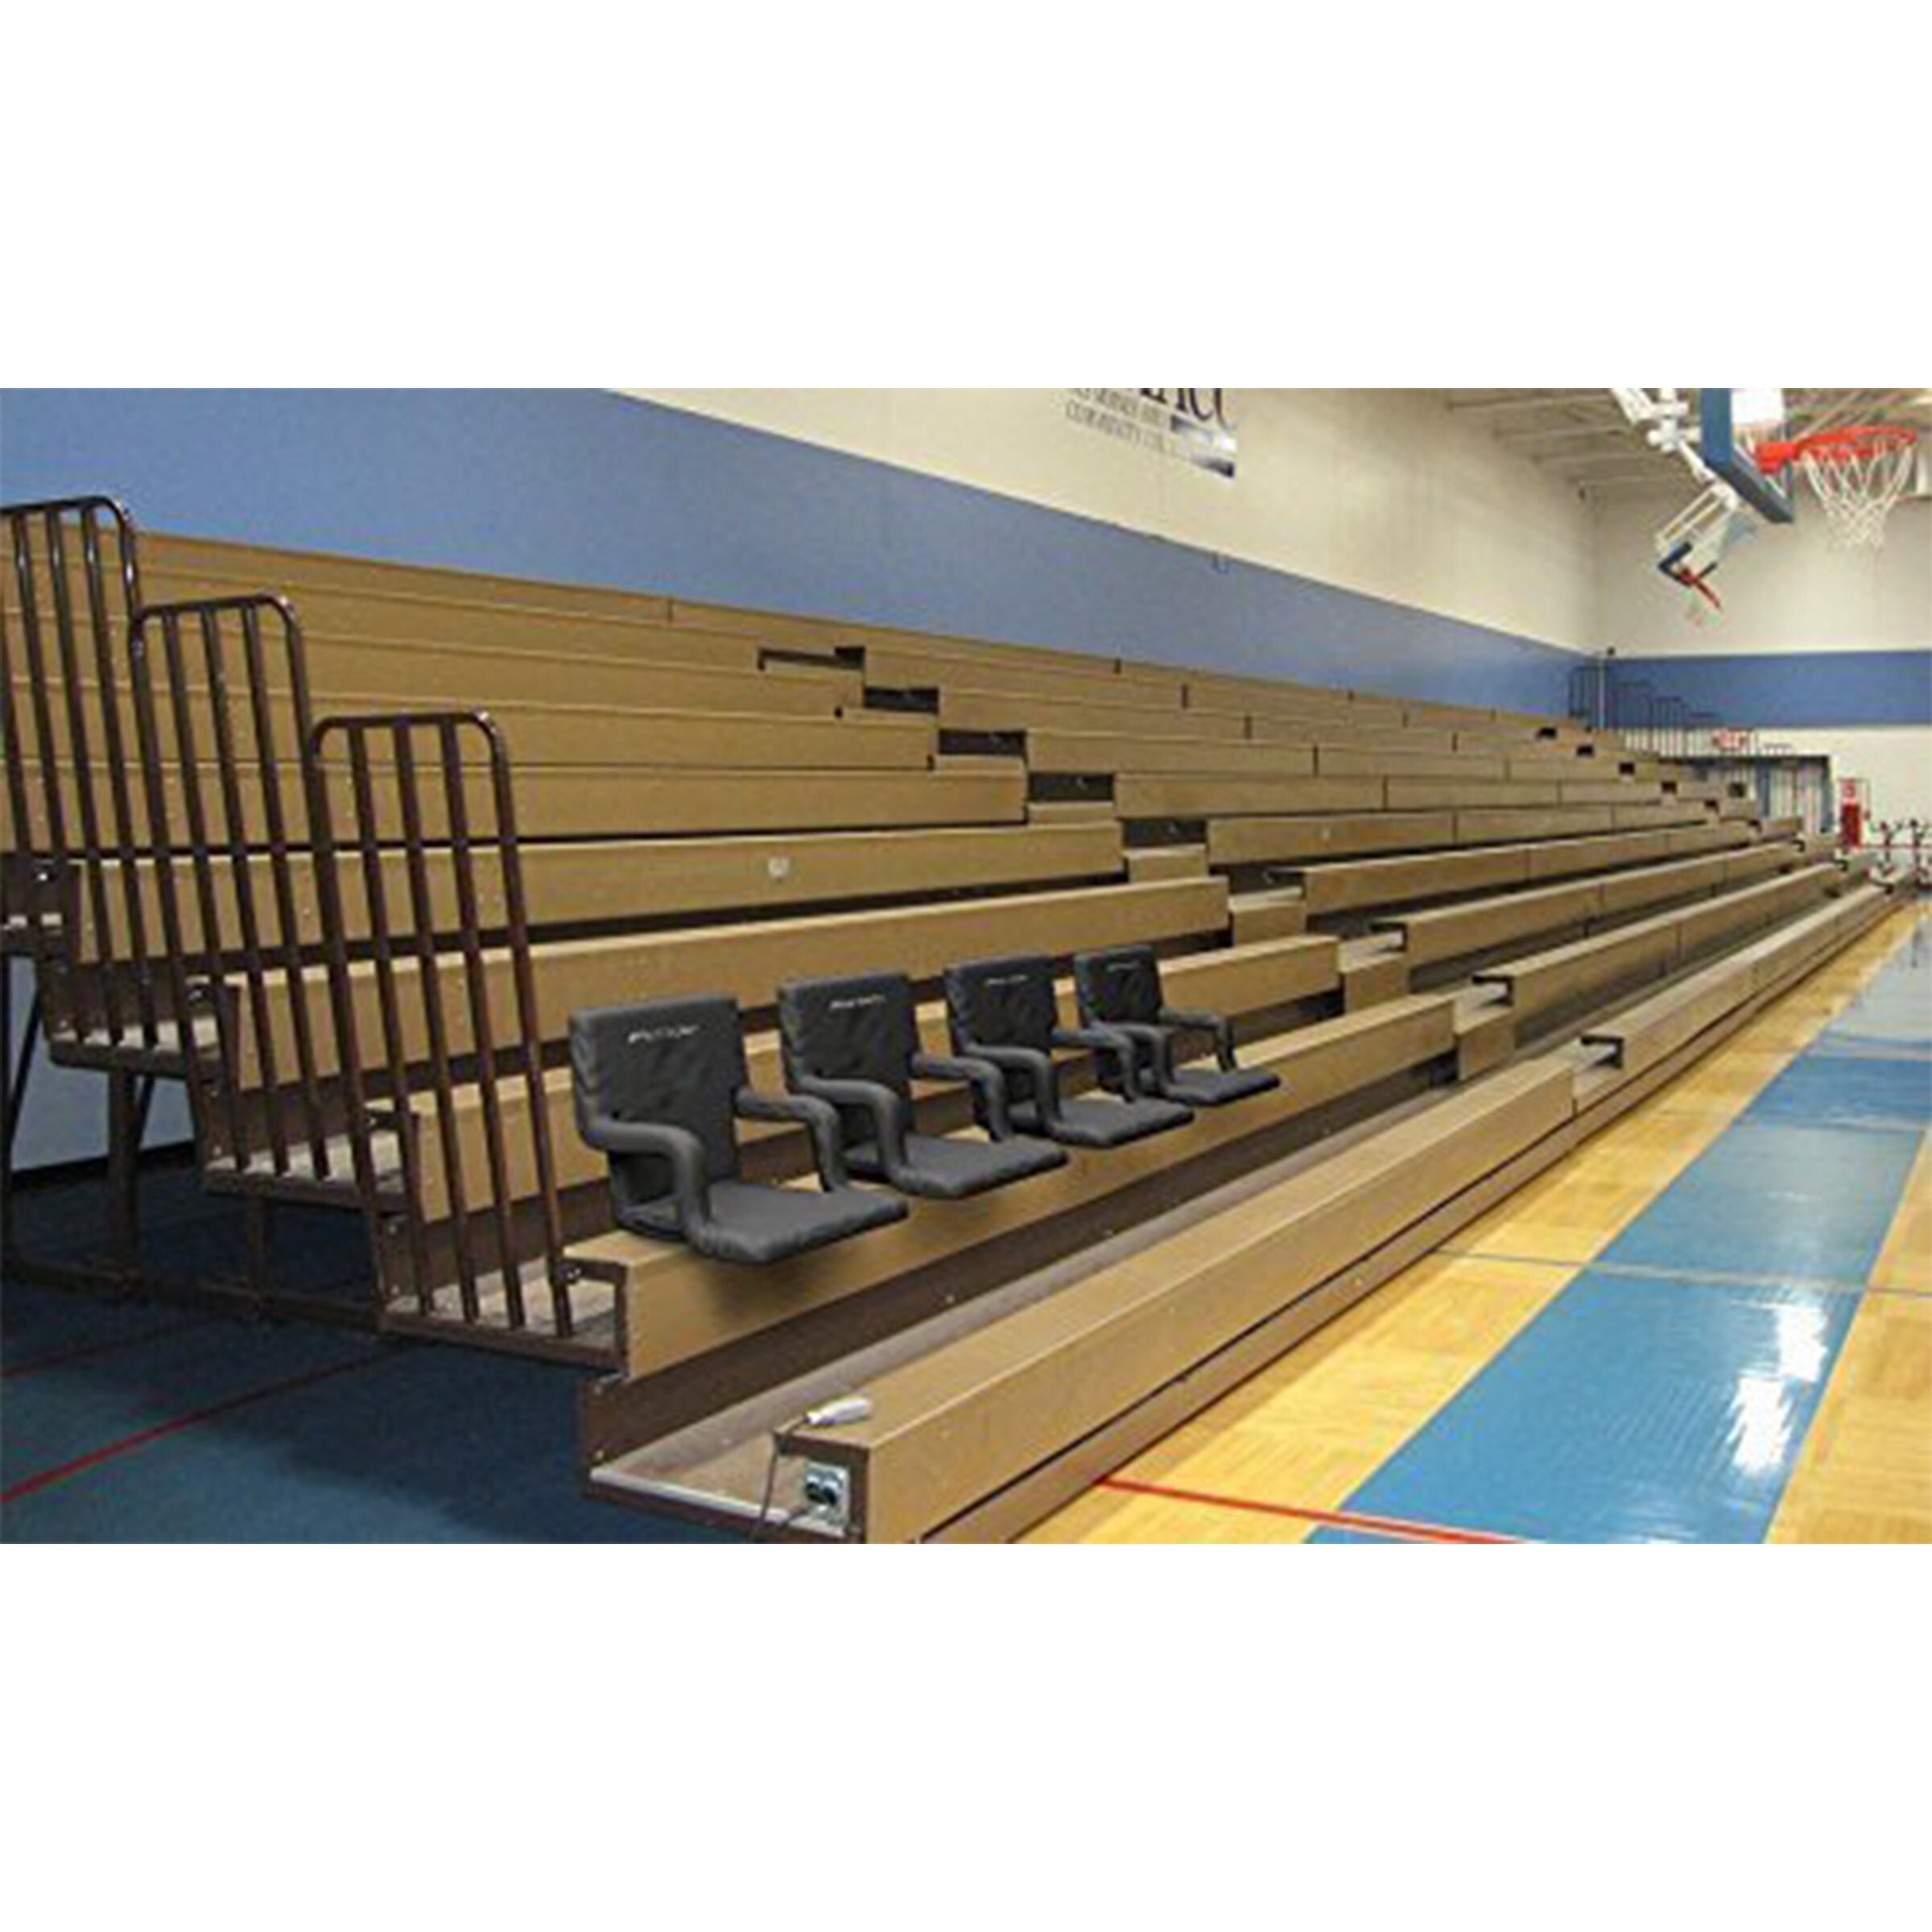 https://ak1.ostkcdn.com/images/products/is/images/direct/ee353ea9a6b89114315ec984e5b6d0ac98515387/Stadium-Seat-Chair-2-Pack-Bleacher-Cushions-with-Padded-Back-Support-By-Home-Complete.jpg